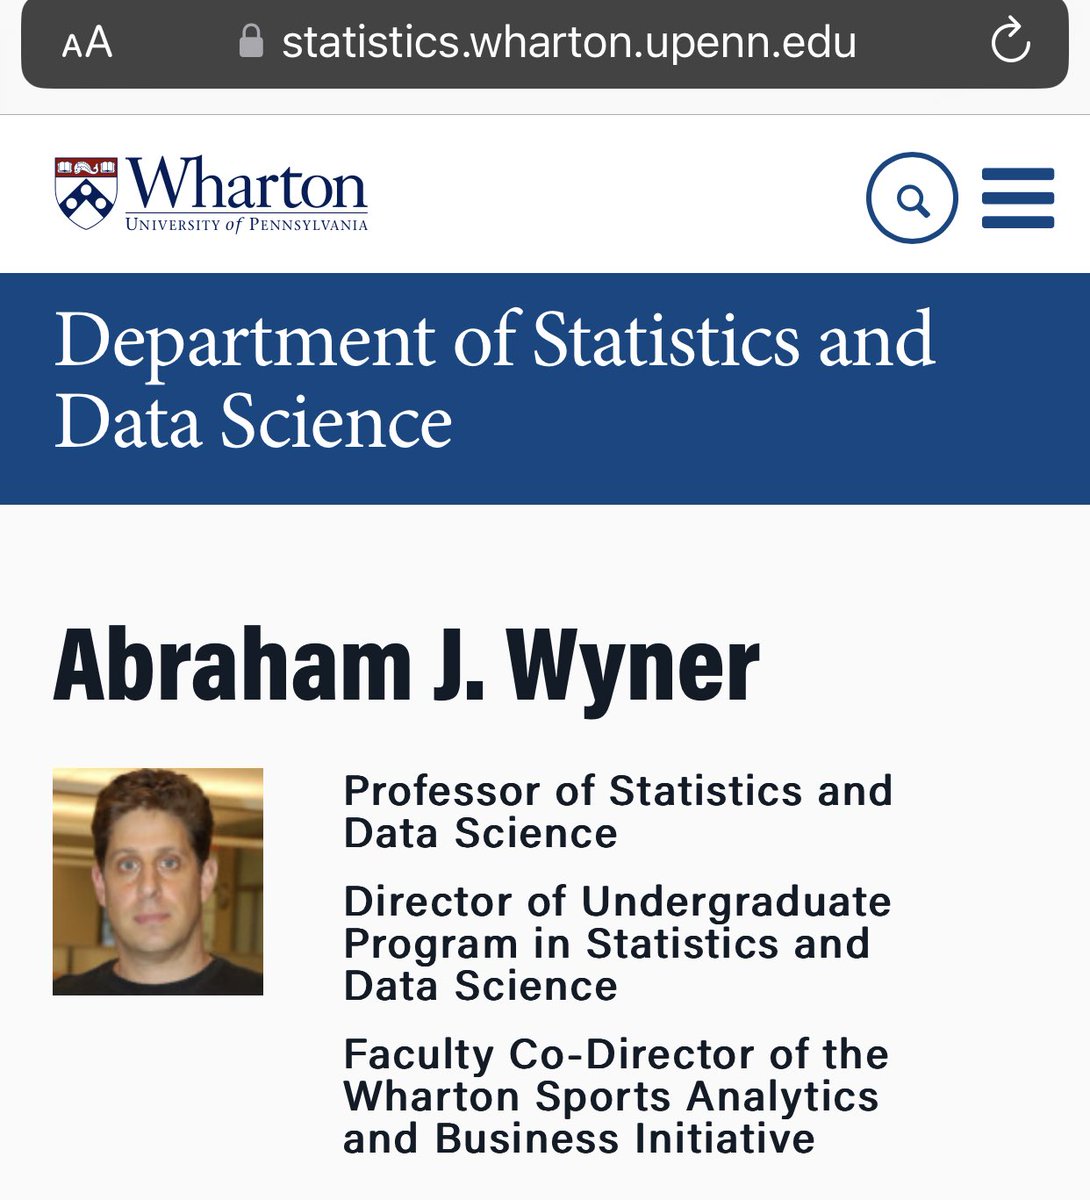 As a data nerd. Get to know the data before accepting someone’s claims about it. Abraham Wyner is a top shelf data analyst and statistician. His first quest is, does the data make sense as described? Skepticism is a major part of scientific inquiry. @adiwyner